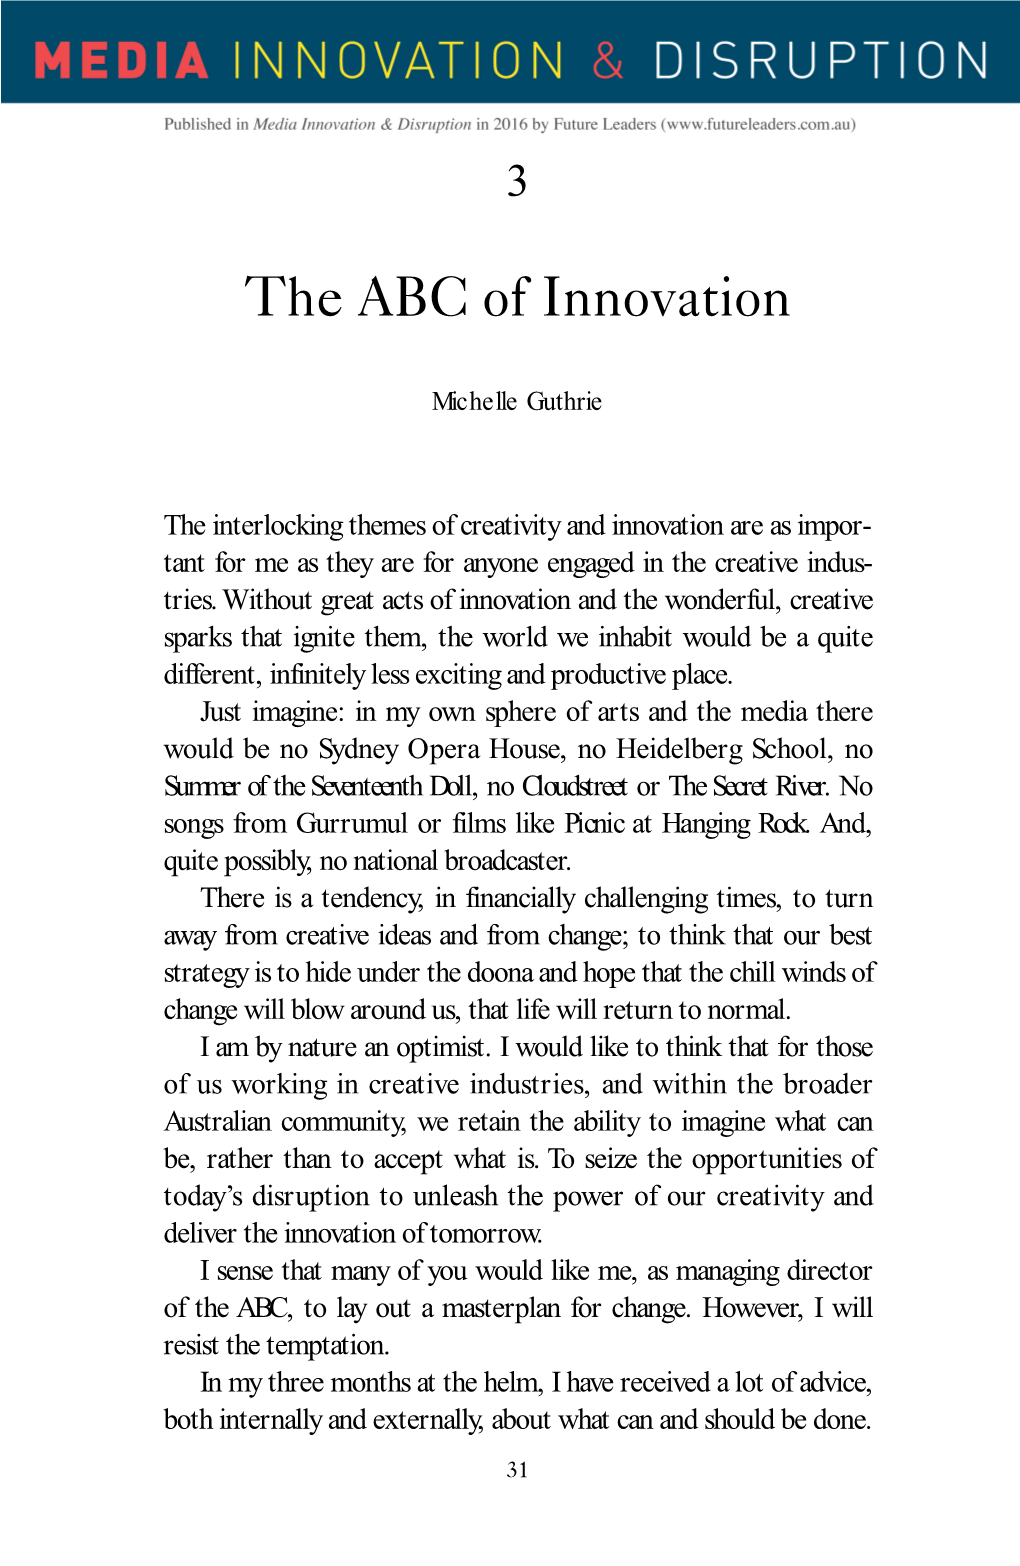 The ABC of Innovation